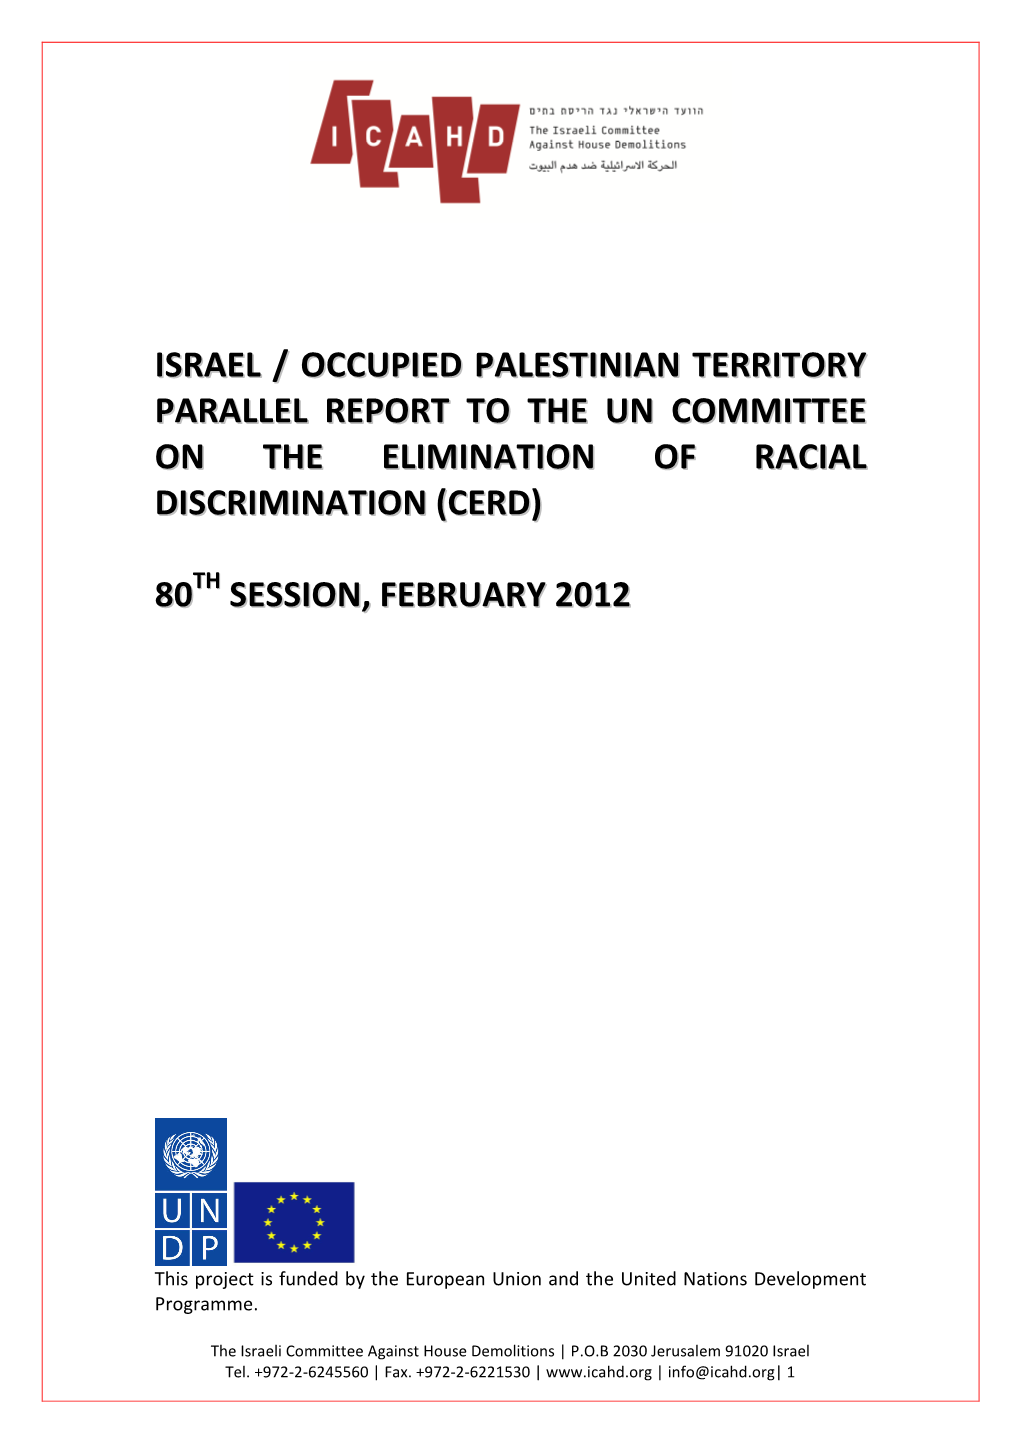 Israel / Occupied Palestinian Territory Parallel Report to the Un Committee on the Elimination of Racial Discrimination (Cerd)